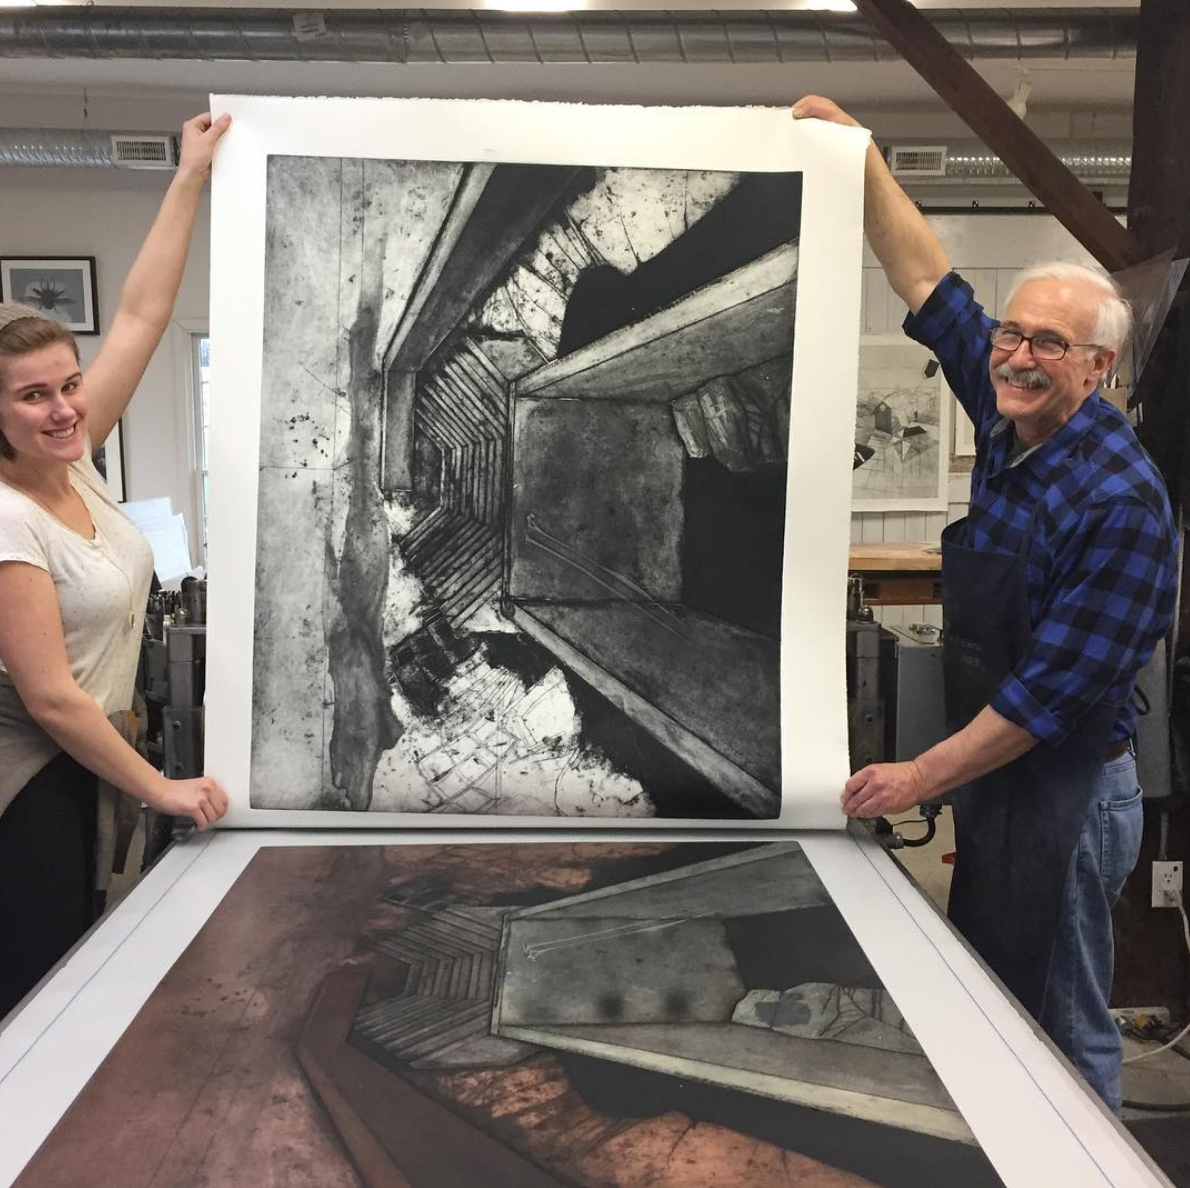 Instructor and student smiling as they hold up a freshly finished black and white print of abstract layers with varying patterns